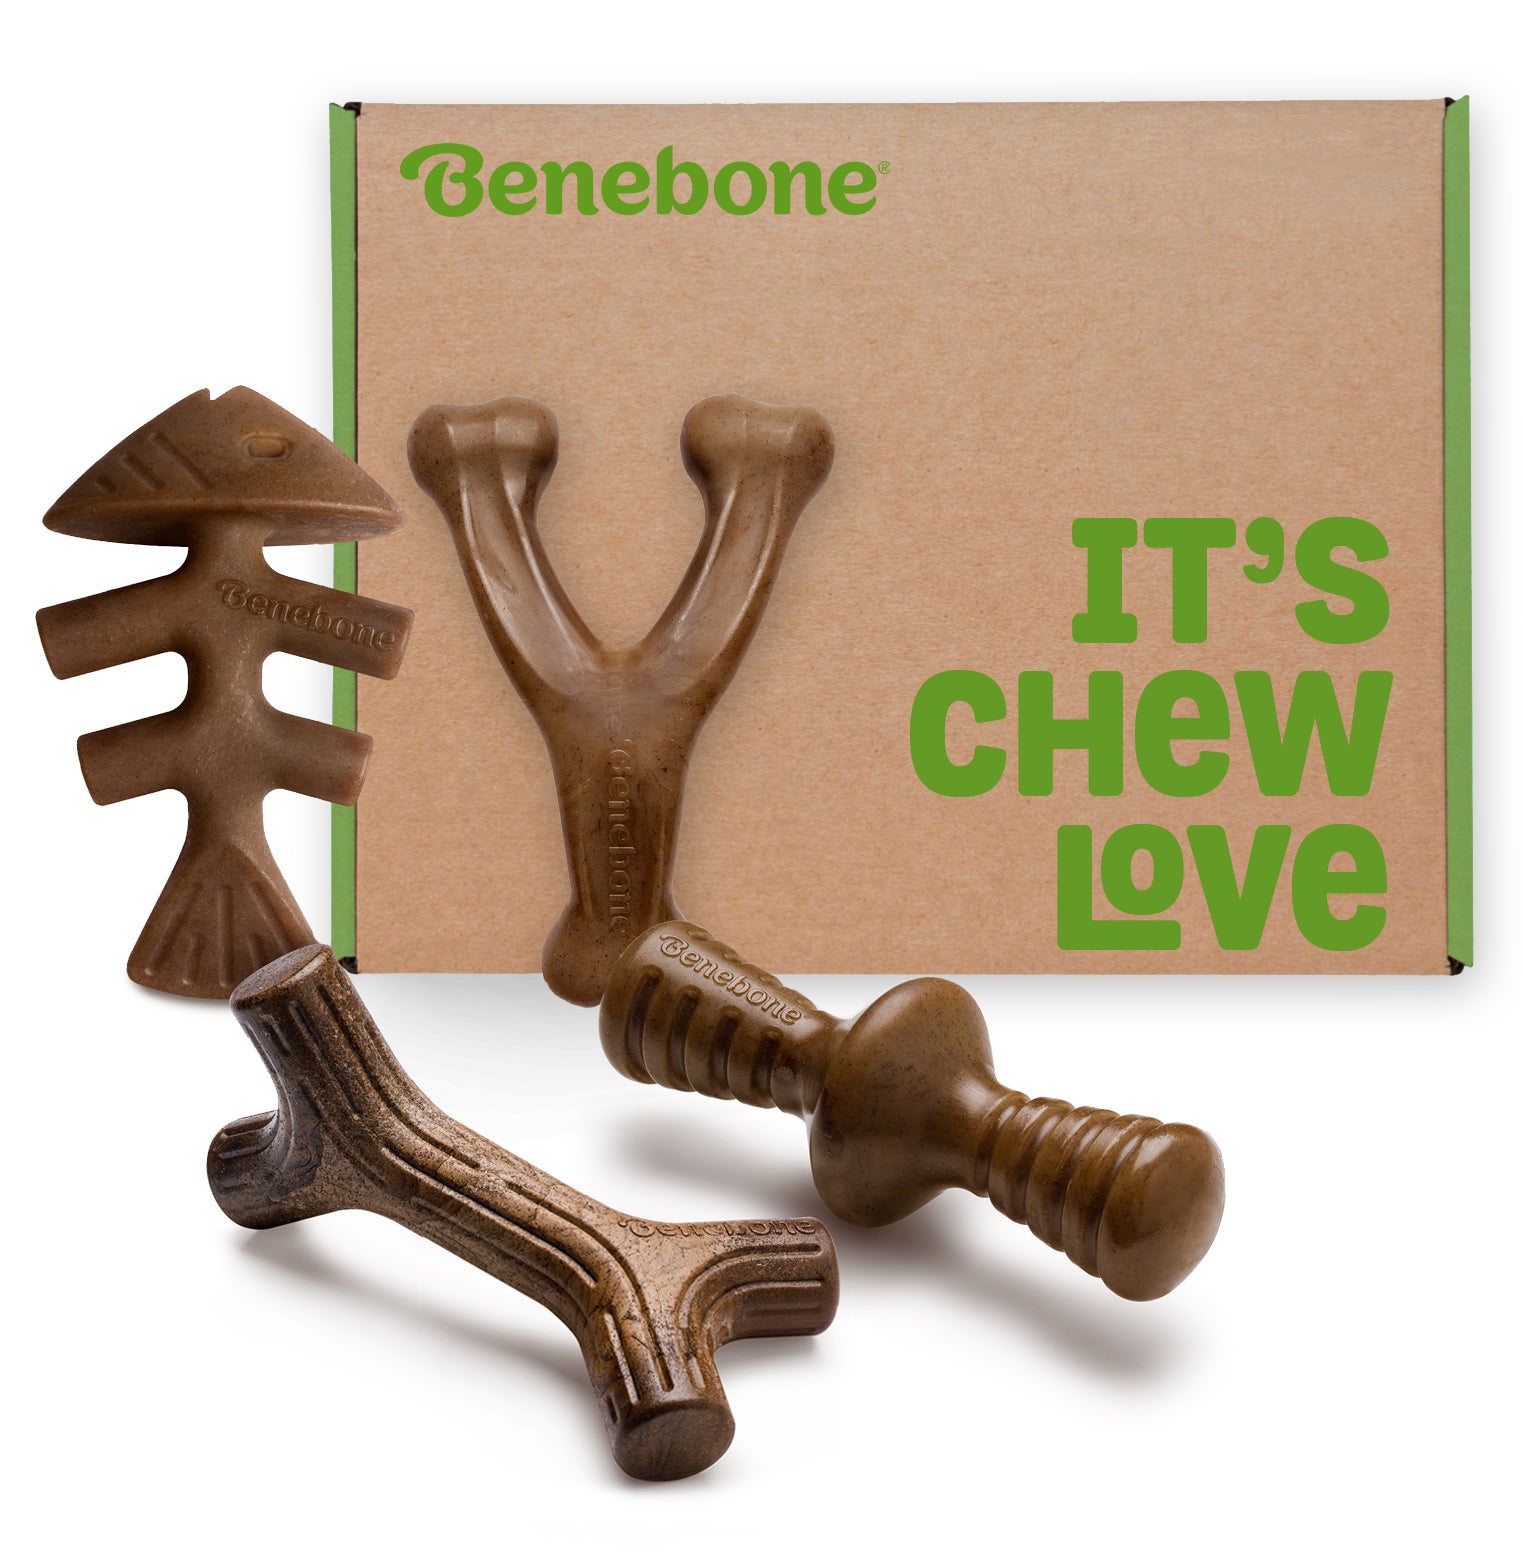 Box with text "It's Chew love" and Benebone Benebone holiday gift box with wishbone, maplestick, fishbone and rubber zaggler